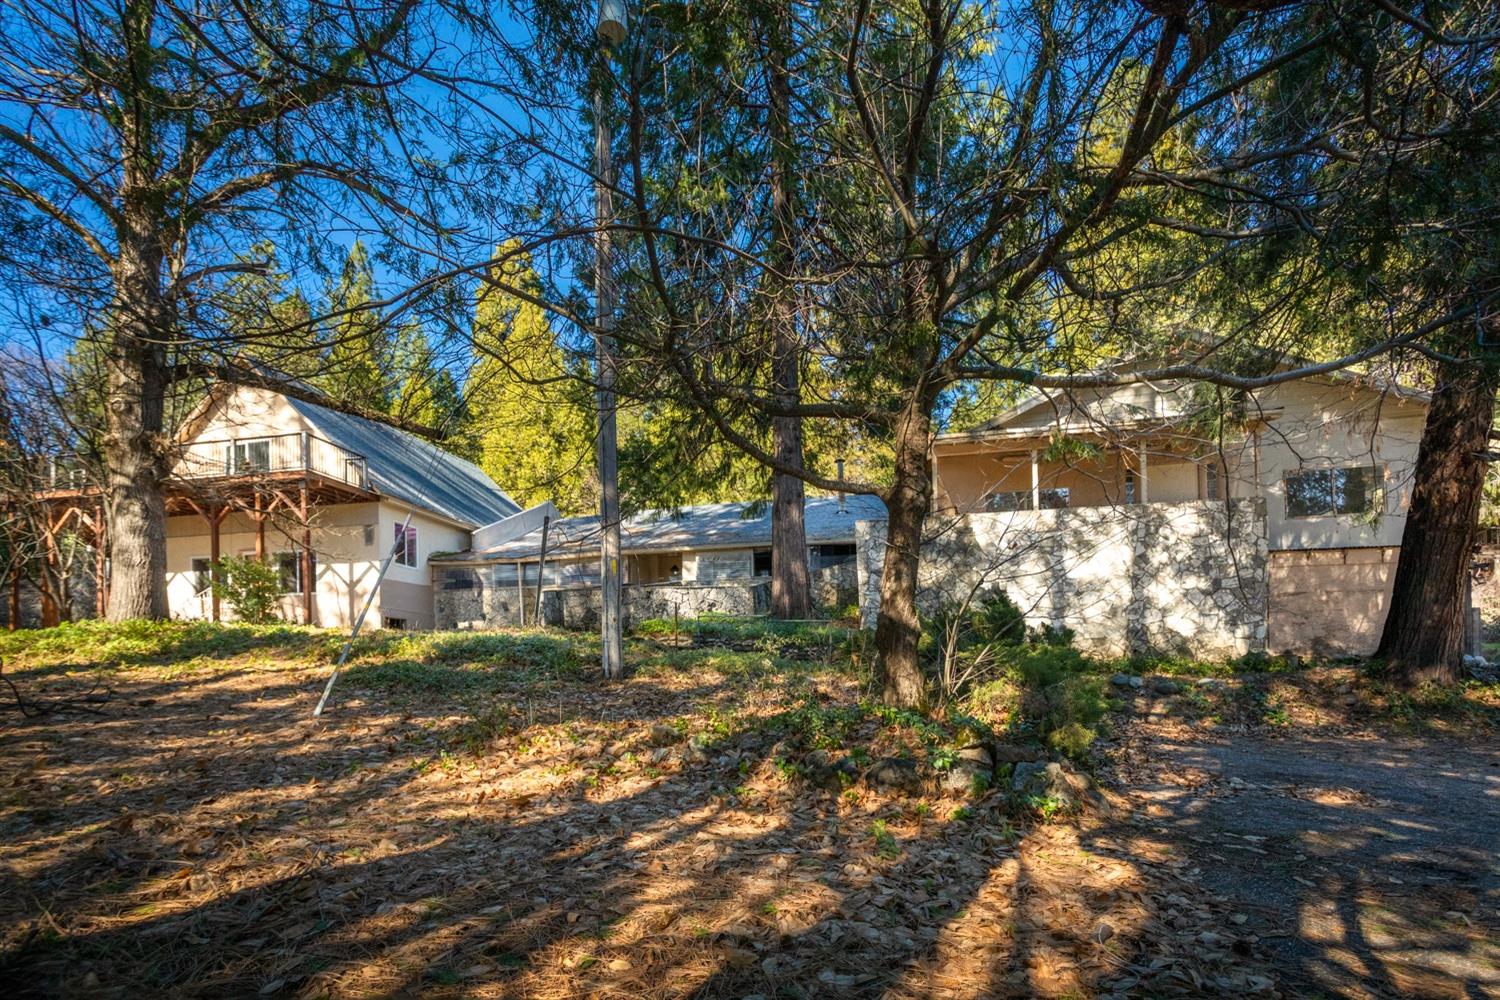 Photo of 11282 Red Dog Rd in Nevada City, CA